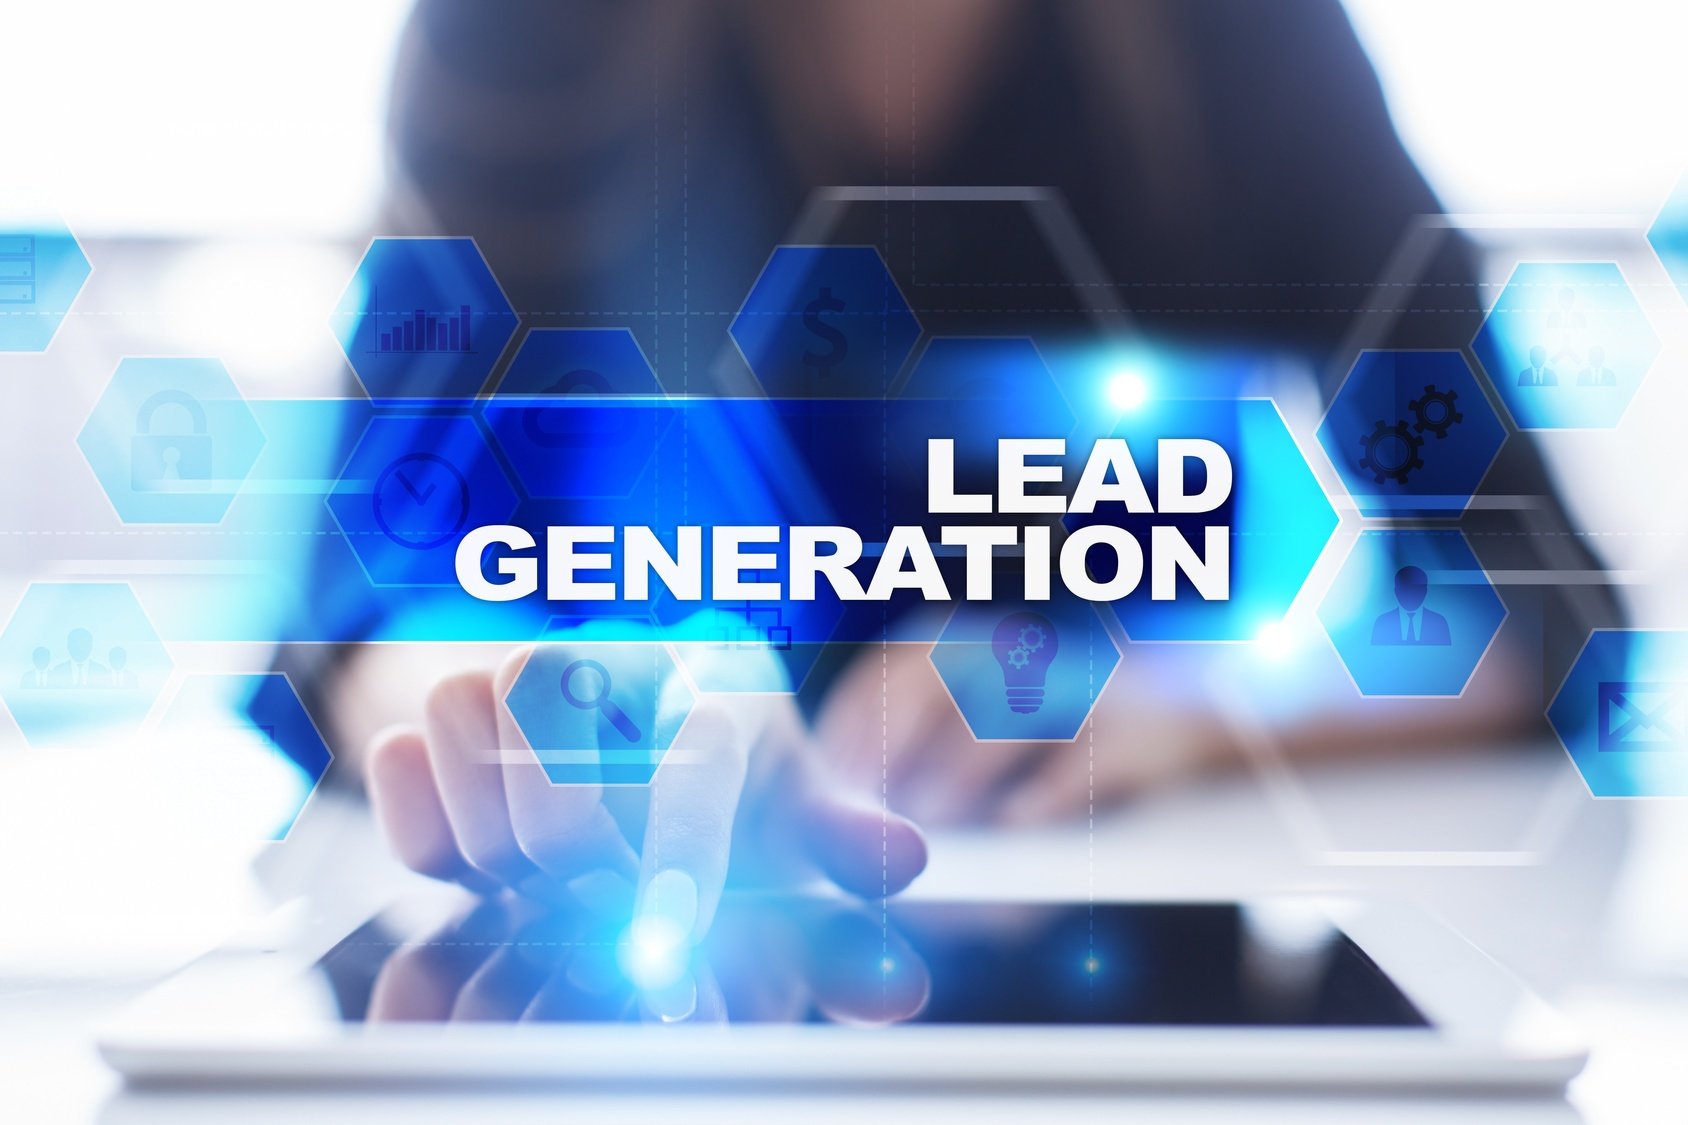 What to look for when choosing a Lead Generation Agency - MyVenturePad.com